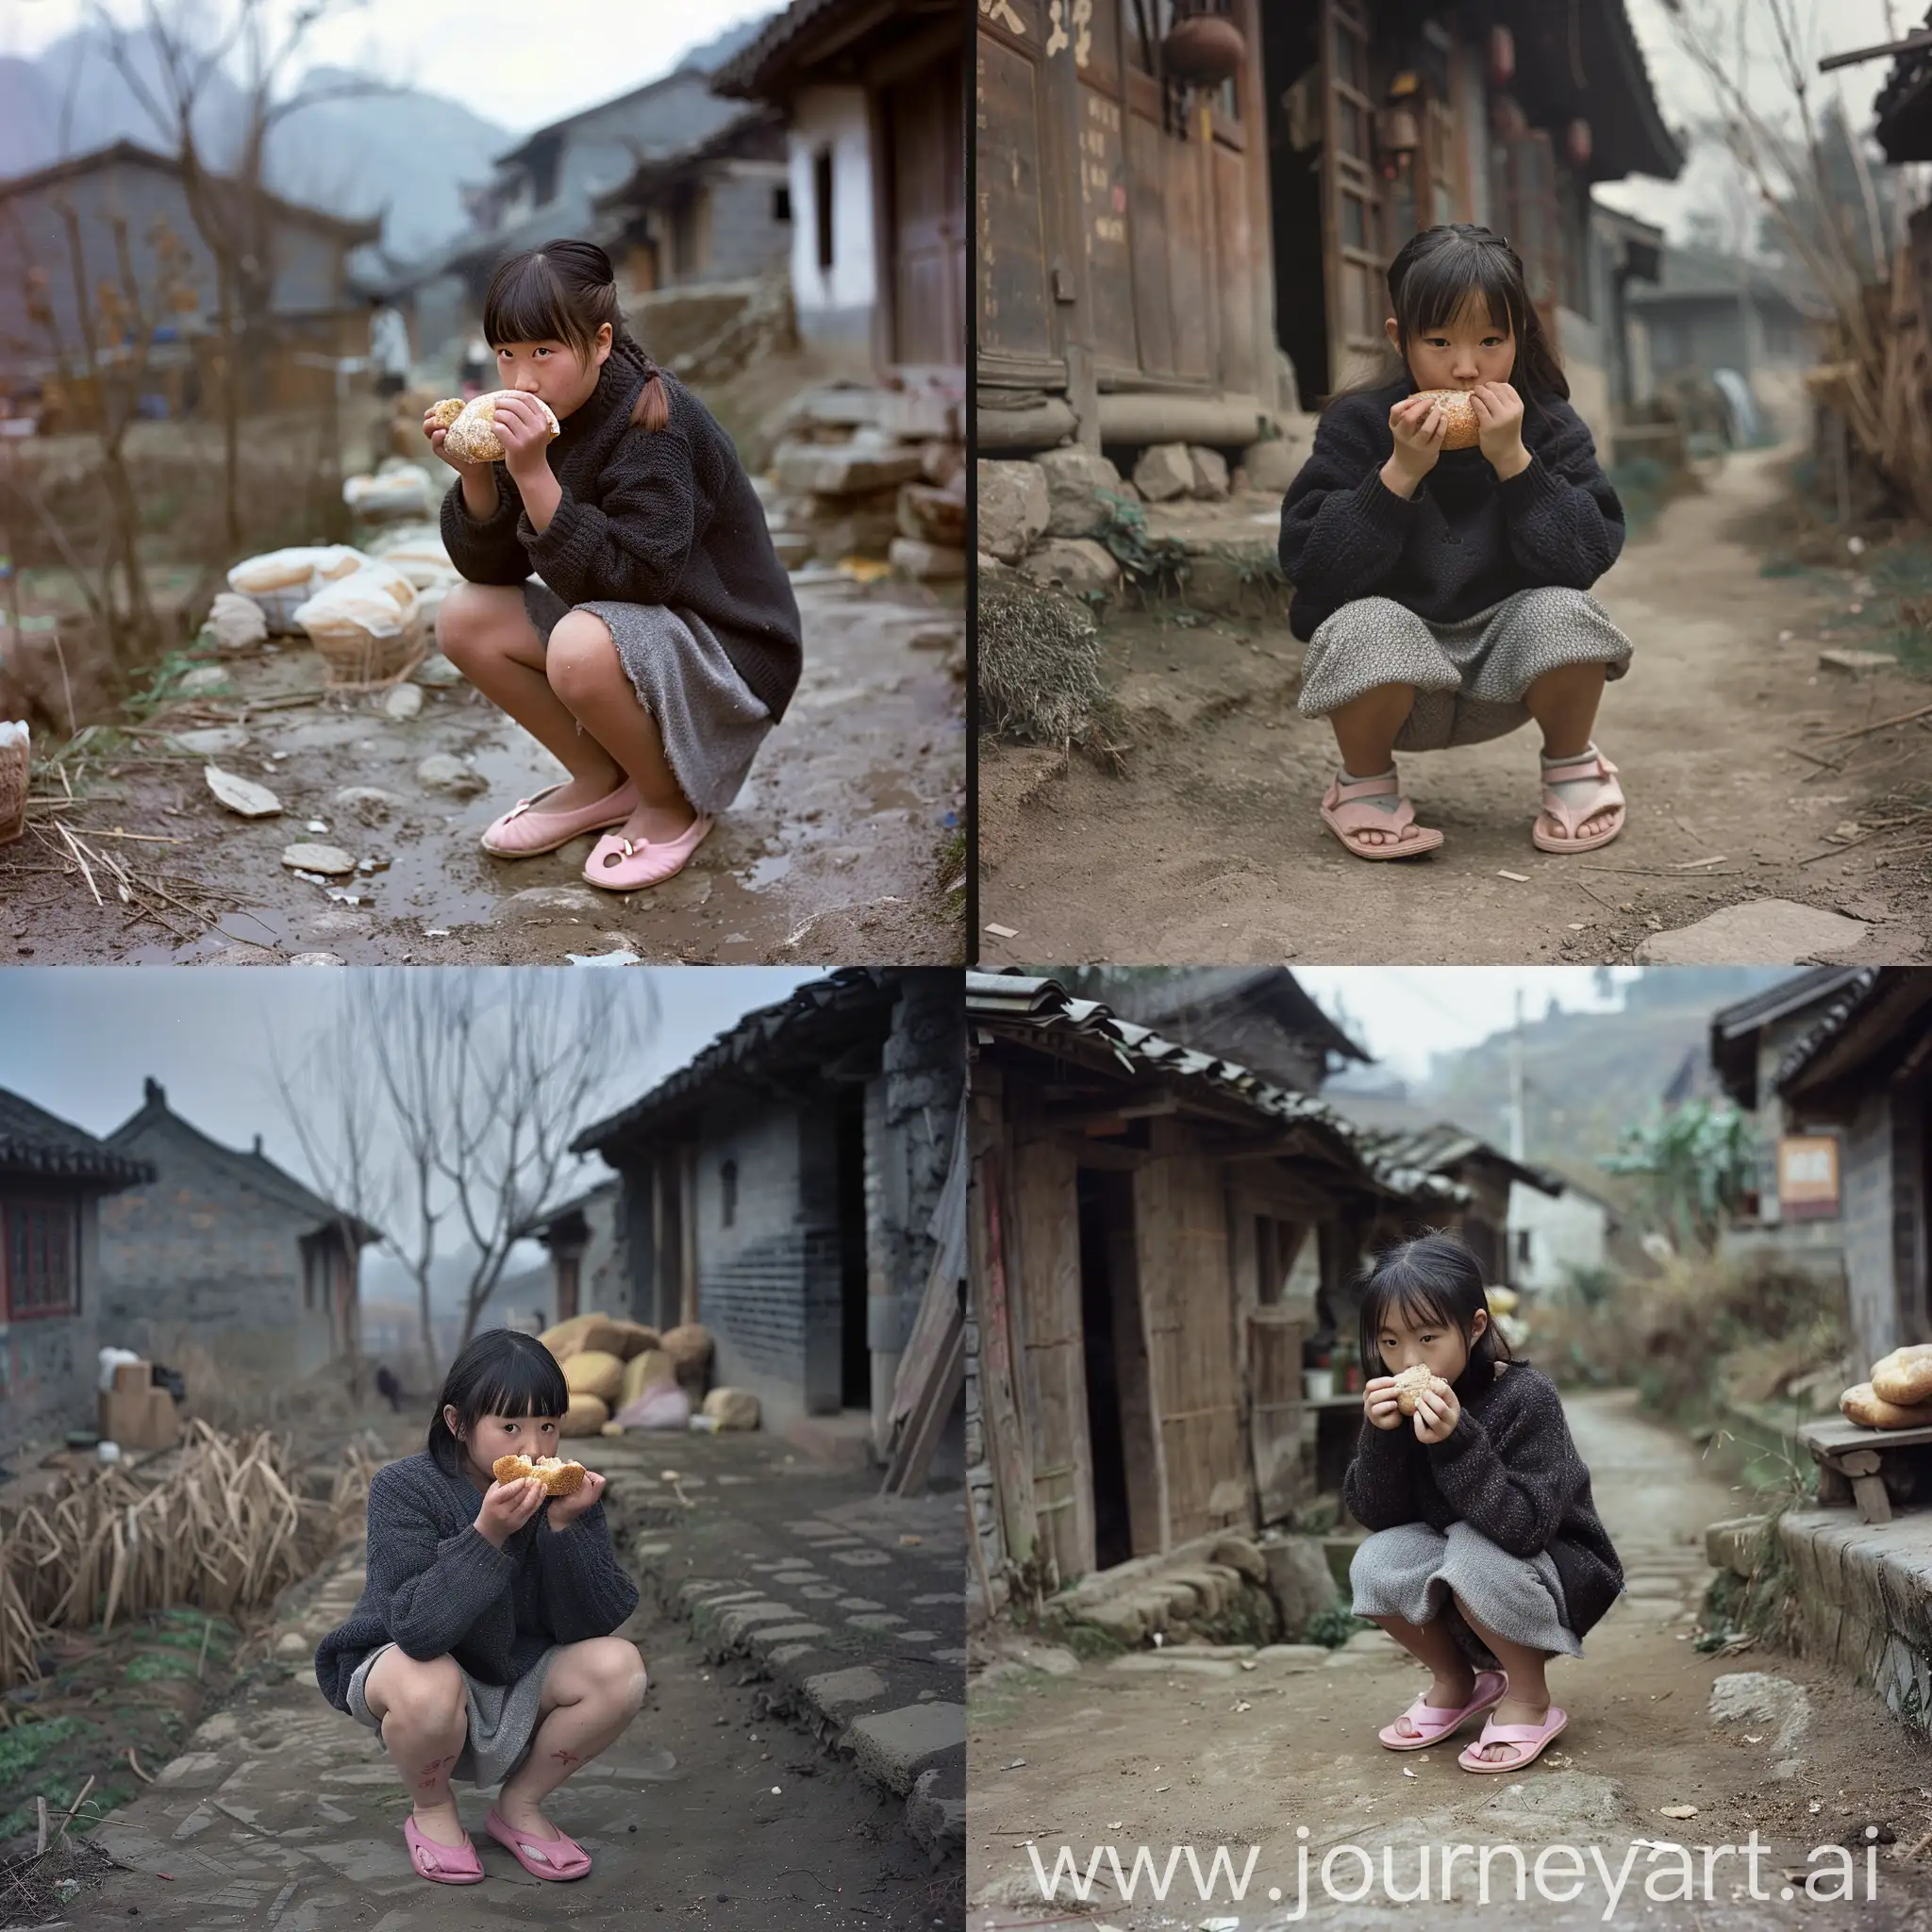 In a village of china,  a girl squat and eating bread. Wearing dark sweater, grey short skirt and pink slippers.